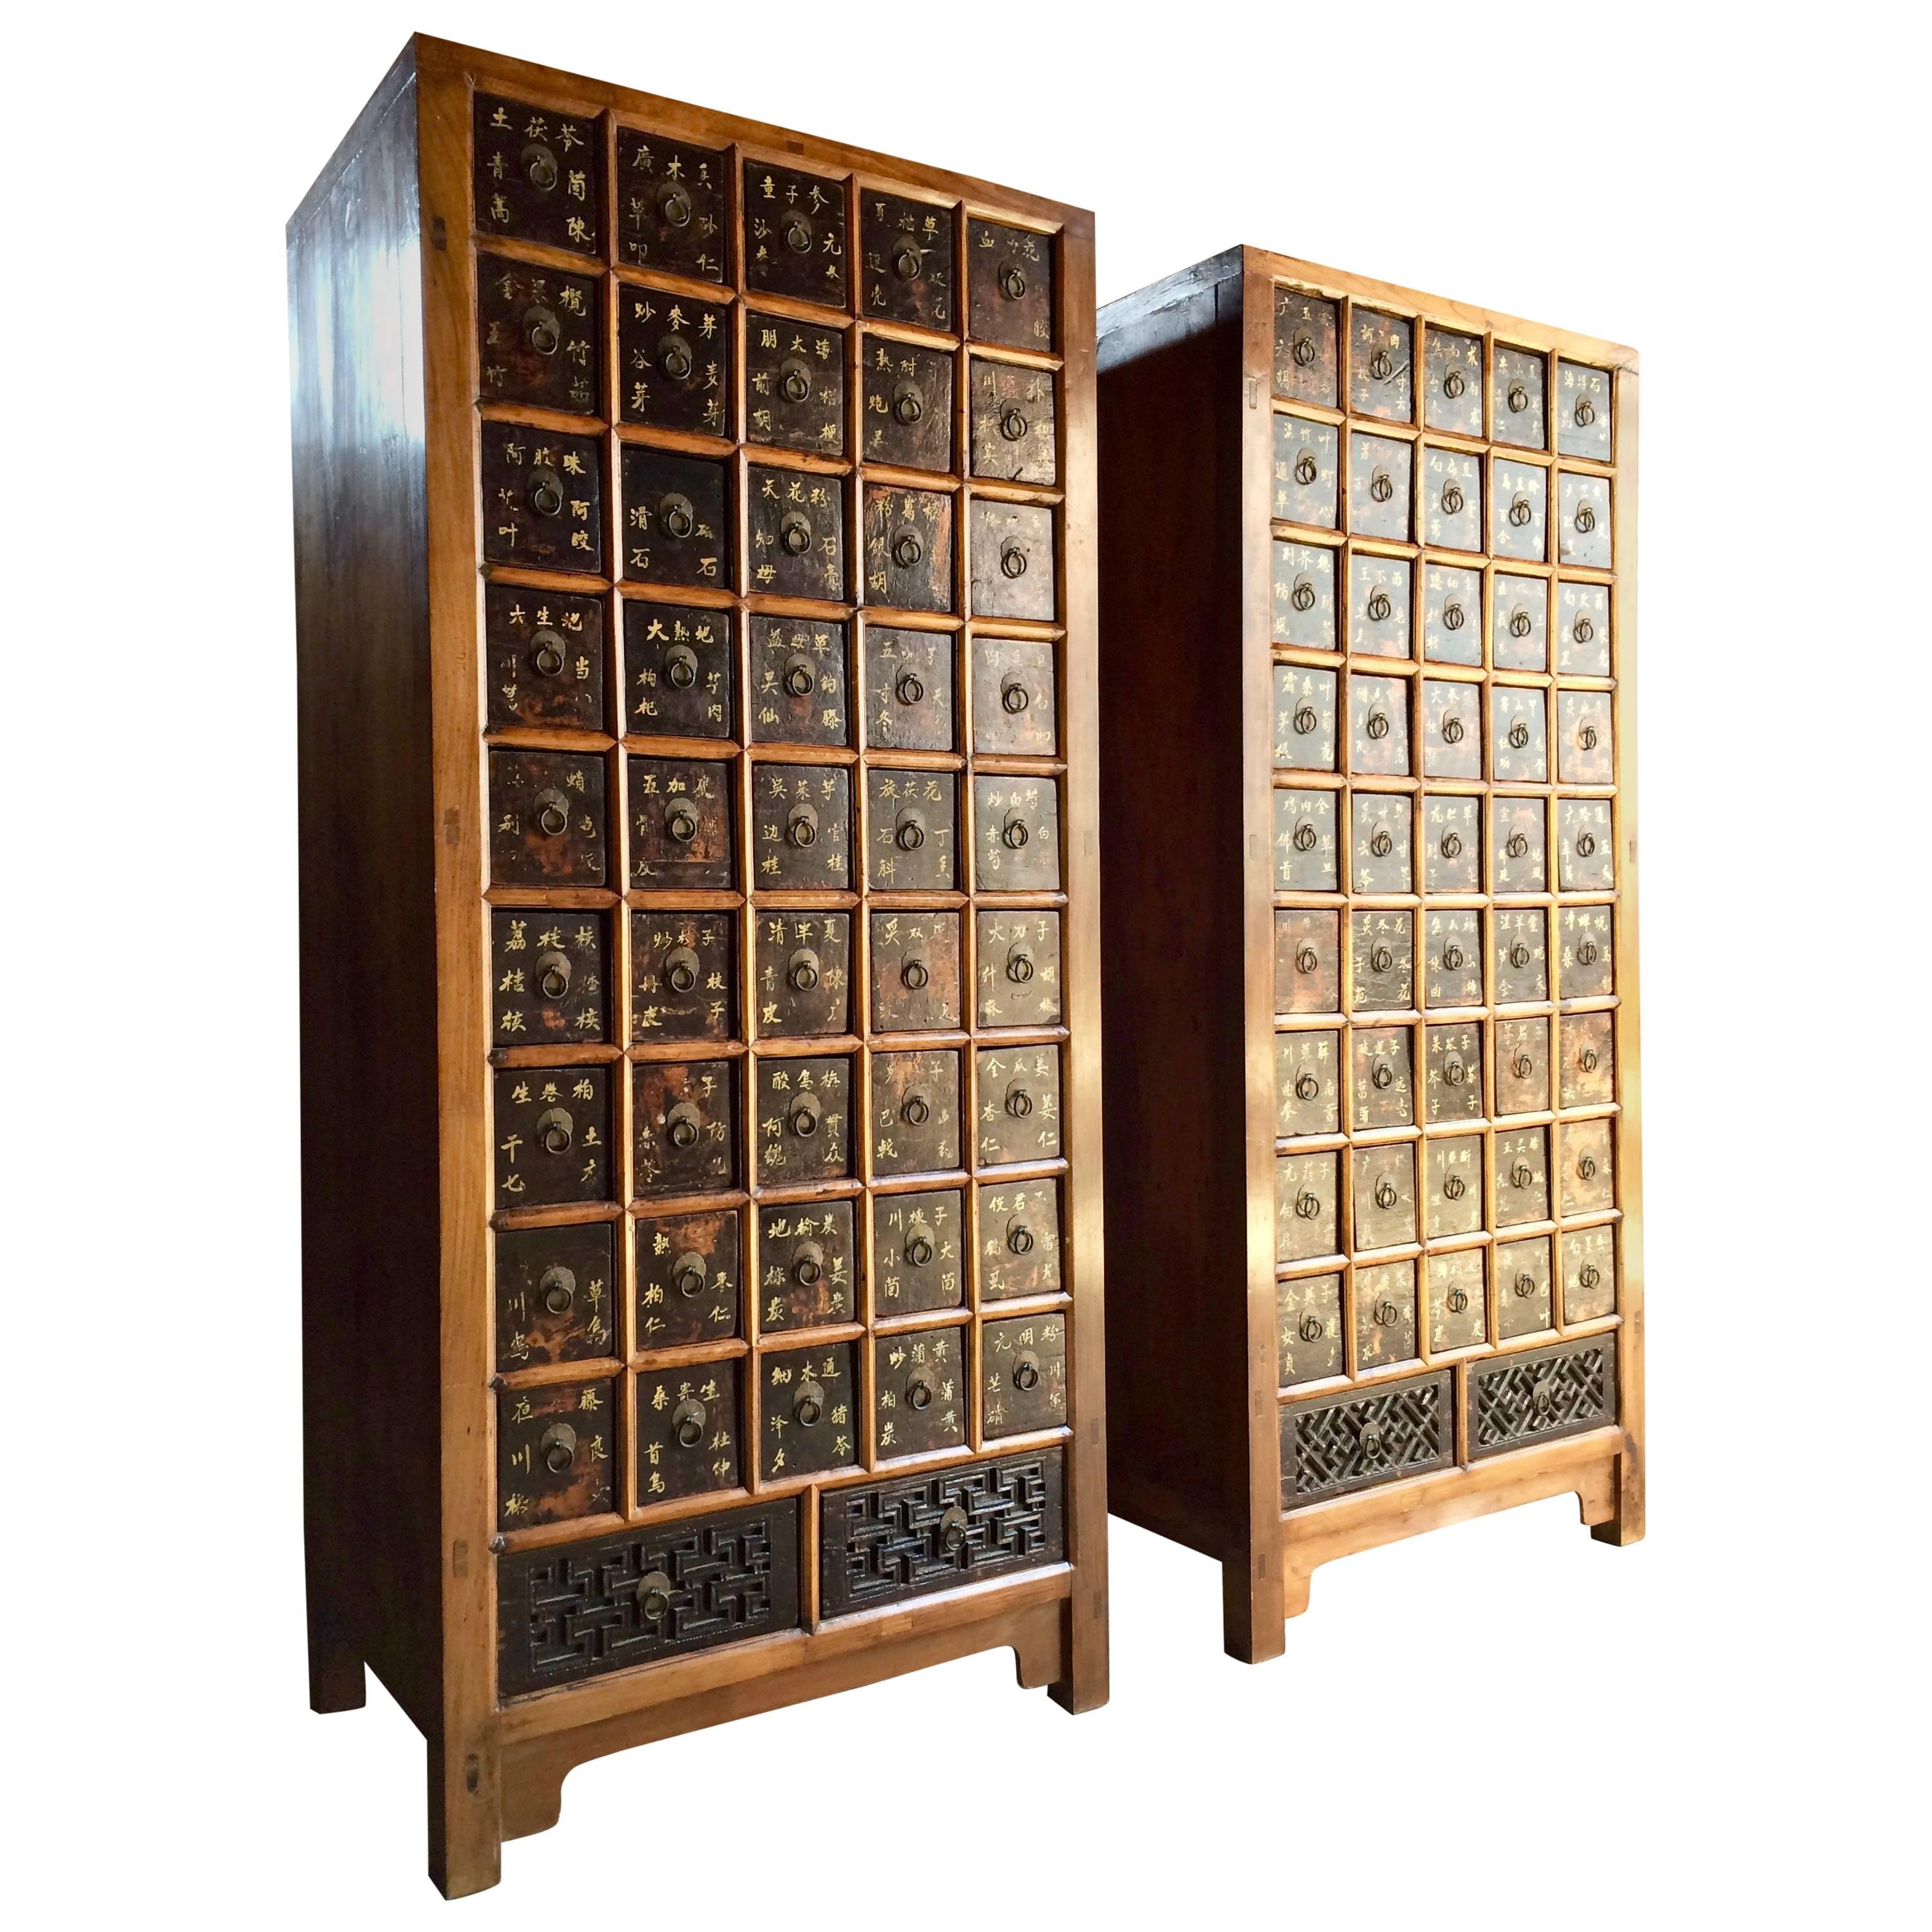 A stunning pair of antique middle Qing dynasty elm apothecary medicine chests dating to circa 1871 from the Shandong province, Northern China, each chest having nine rows of five square drawers (forty five drawers per chest, ninety in total) with